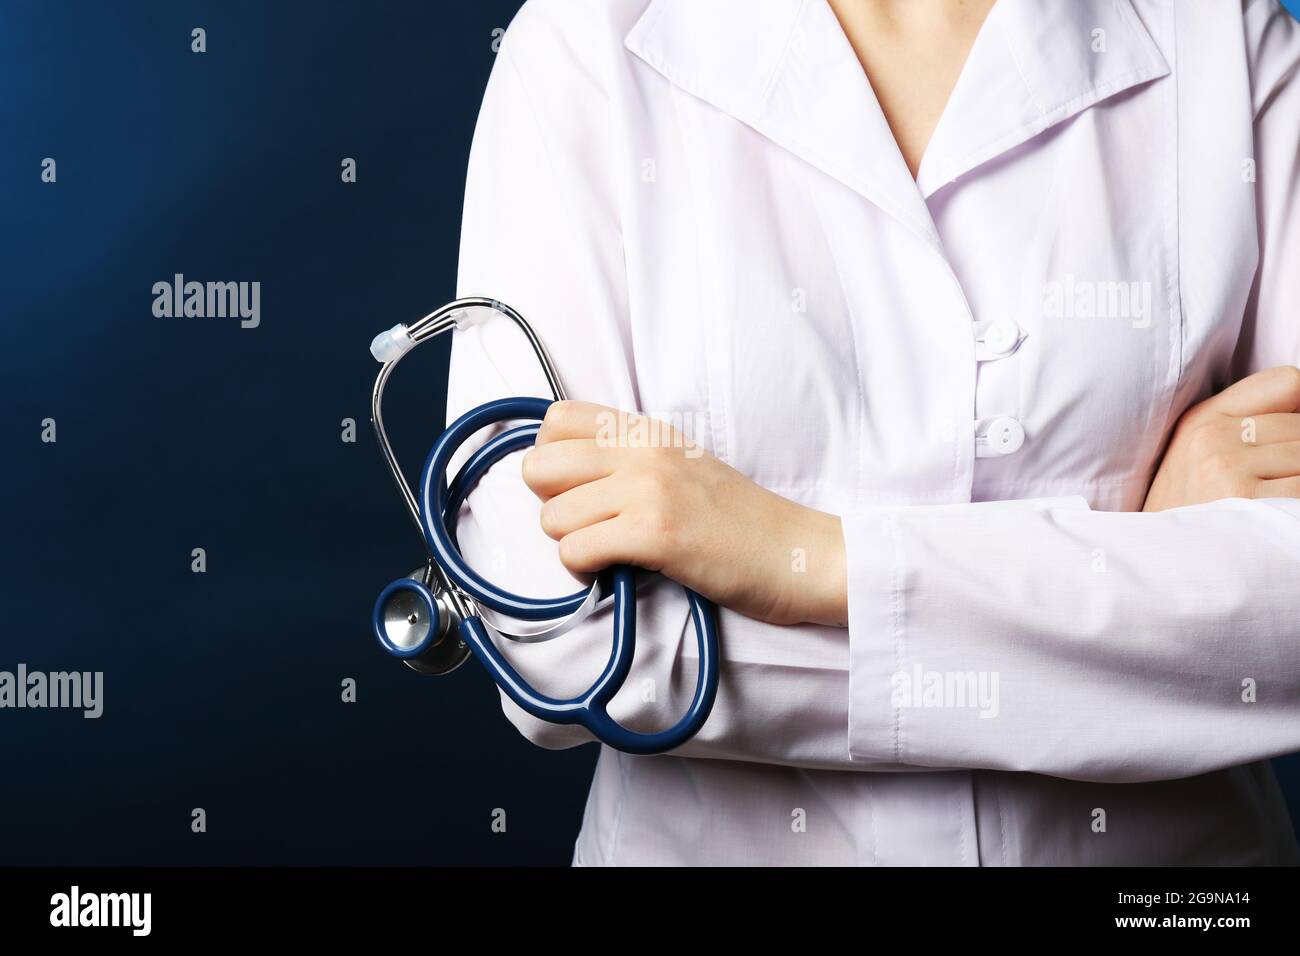 https://c8.alamy.com/comp/2G9NA14/close-up-of-doctor-hand-with-stethoscope-on-dark-blue-background-2G9NA14.jpg